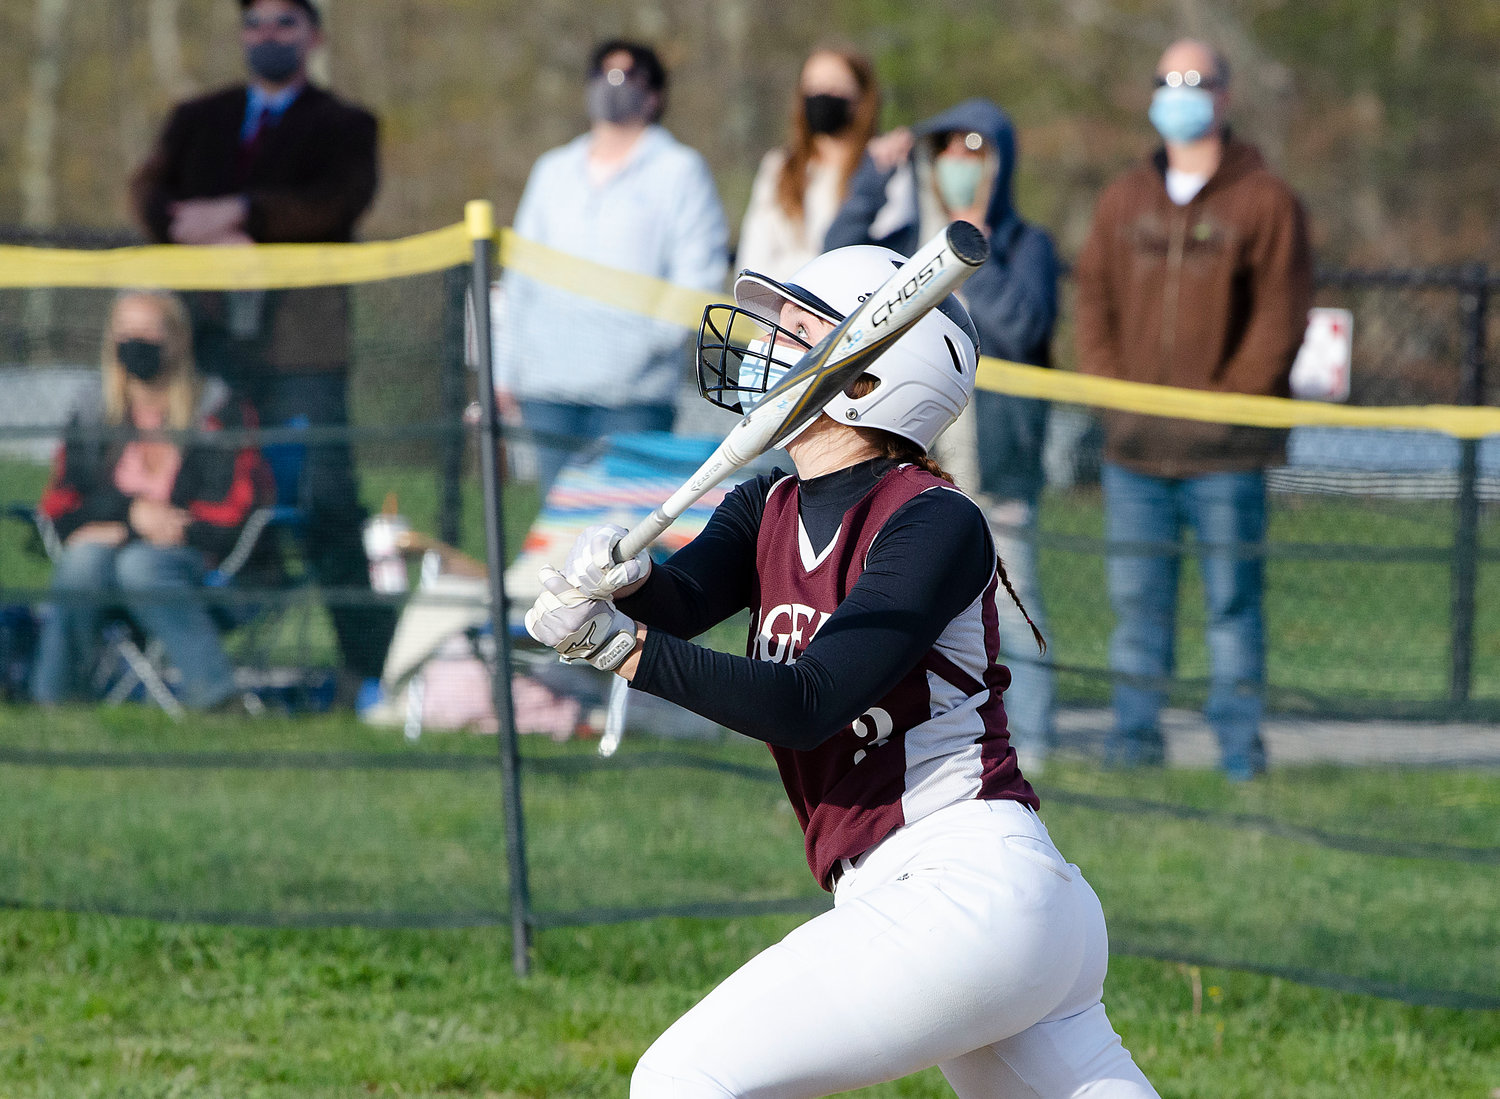 Emily Oaks had two hits and two rbi during the Tigers 11-1 victory over Davies on Tuesday.